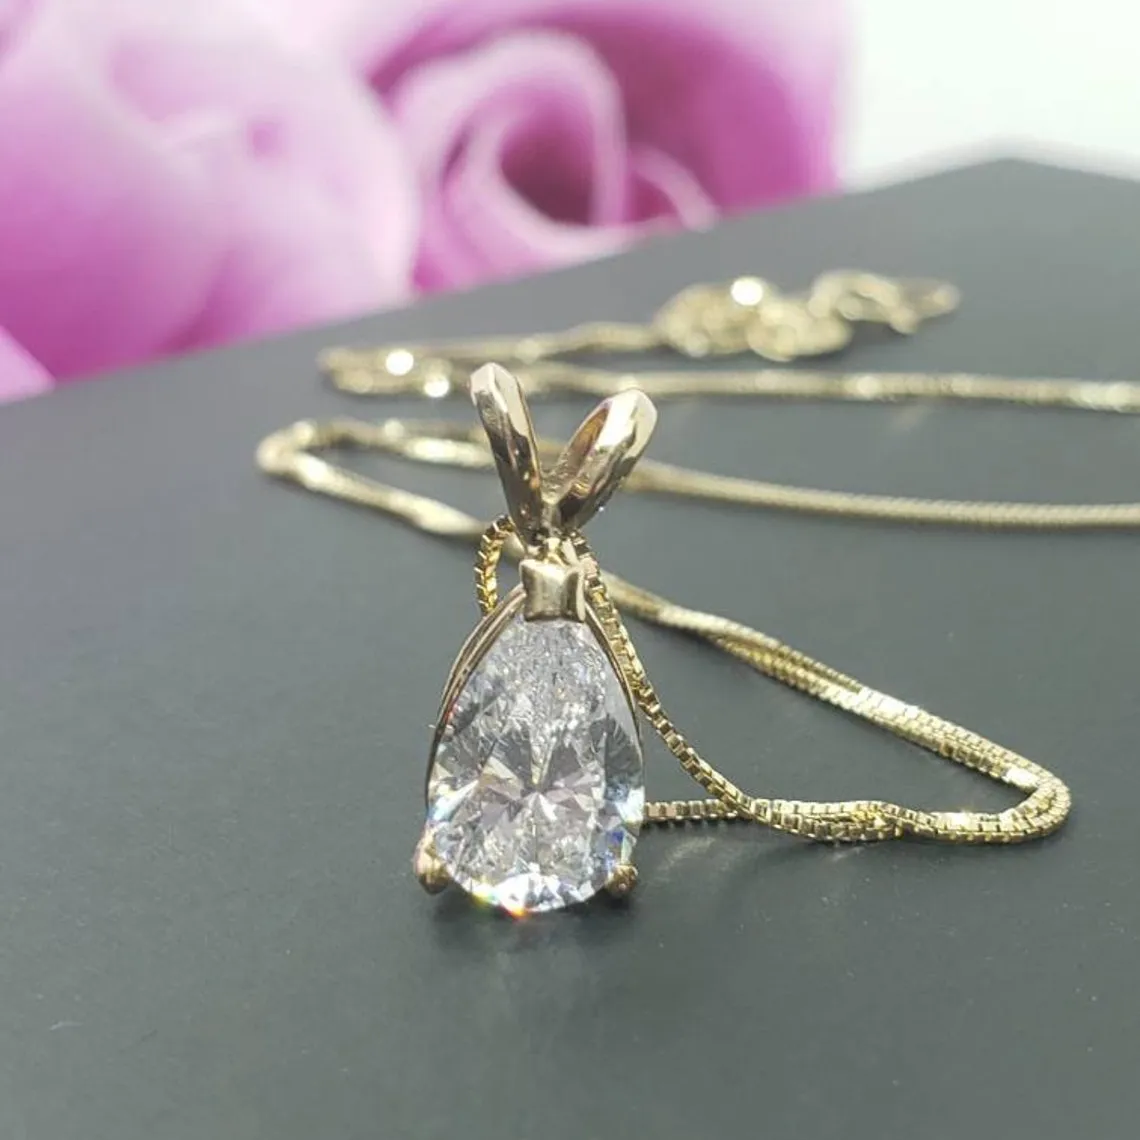 Round Moissanite Solitaire Teardrop Pendant Bezel Set Anniversary Gift For Her in 14k Solid Yellow Gold Pendant by Ritzin